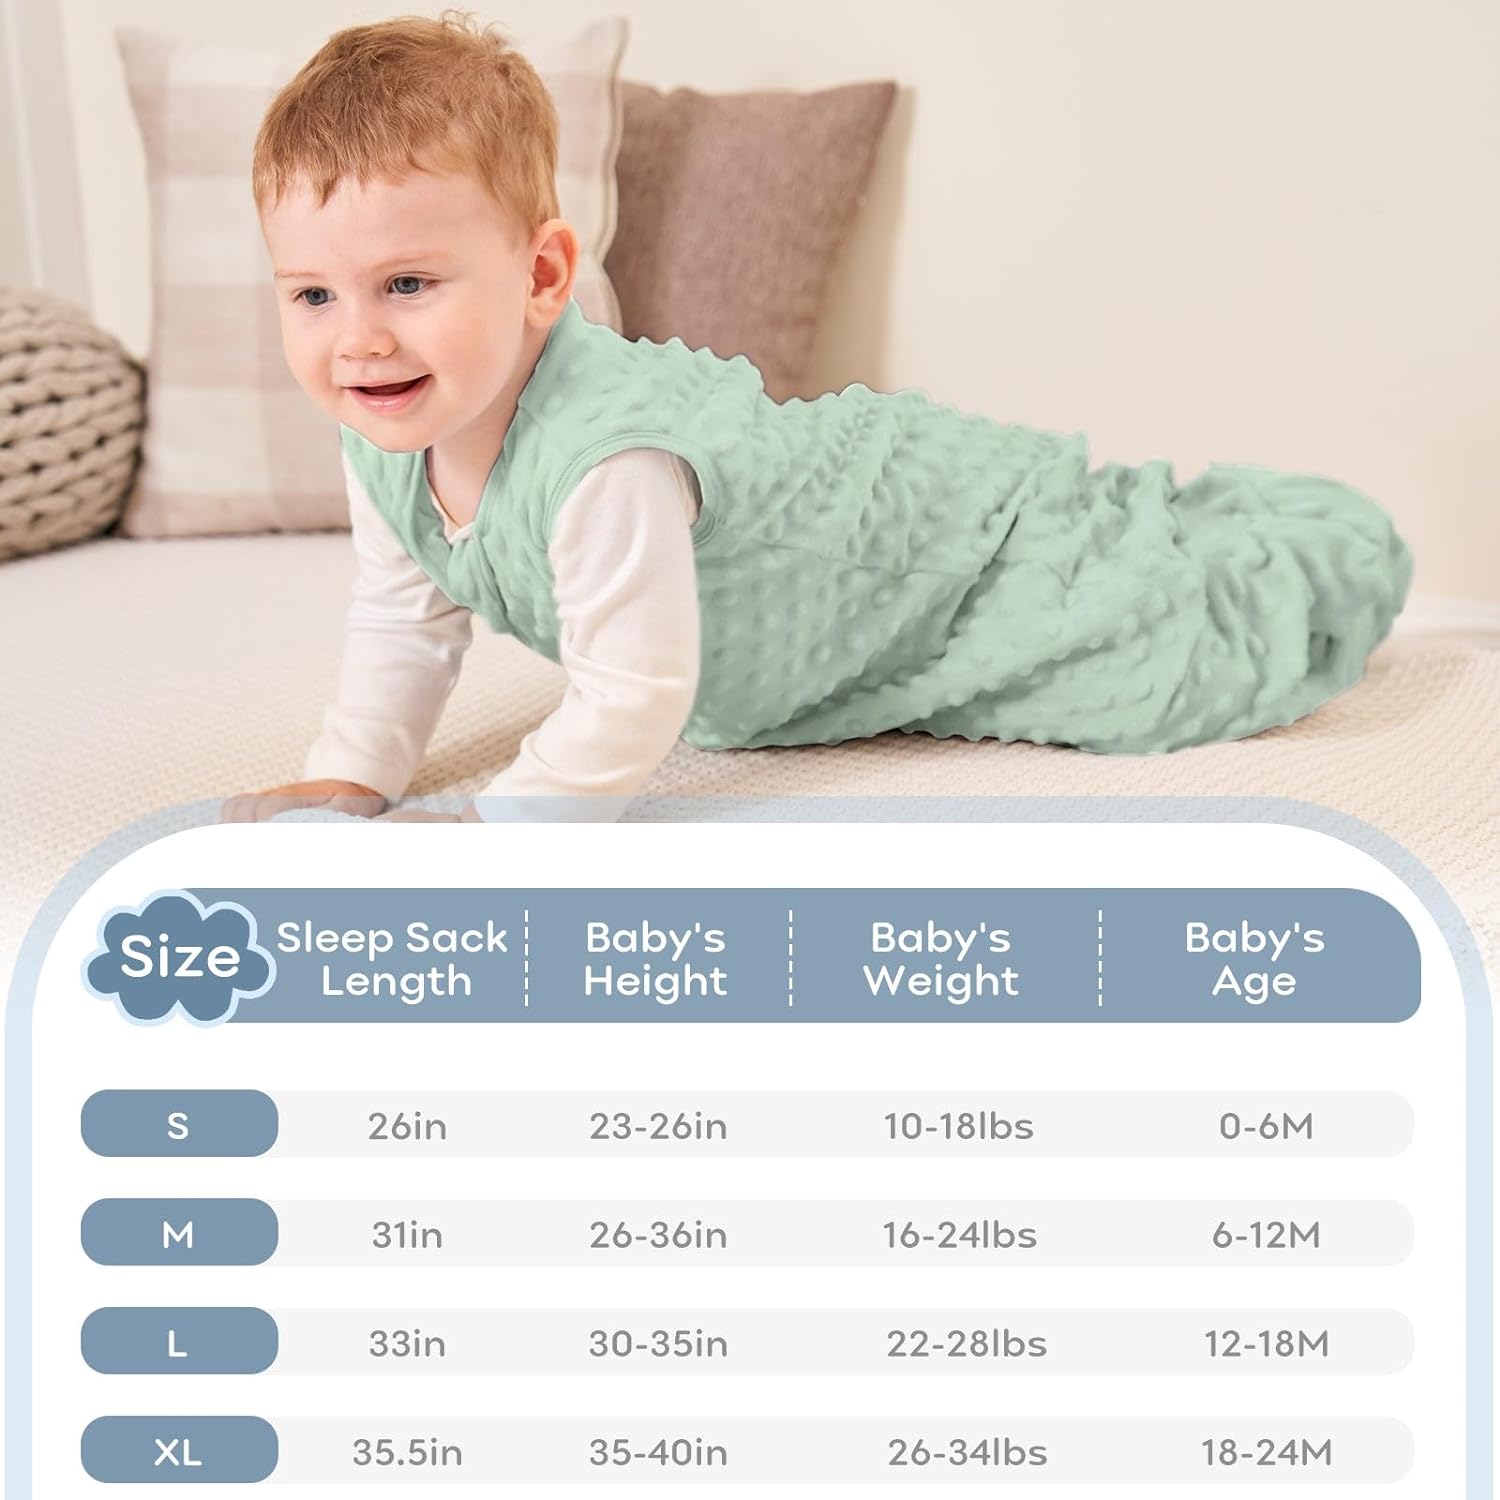 Yoofoss Baby Sleep Sack with Plush Dots, 2 Pack, TOG 1.5 Baby Wearable Blanket with 2-Way Zipper